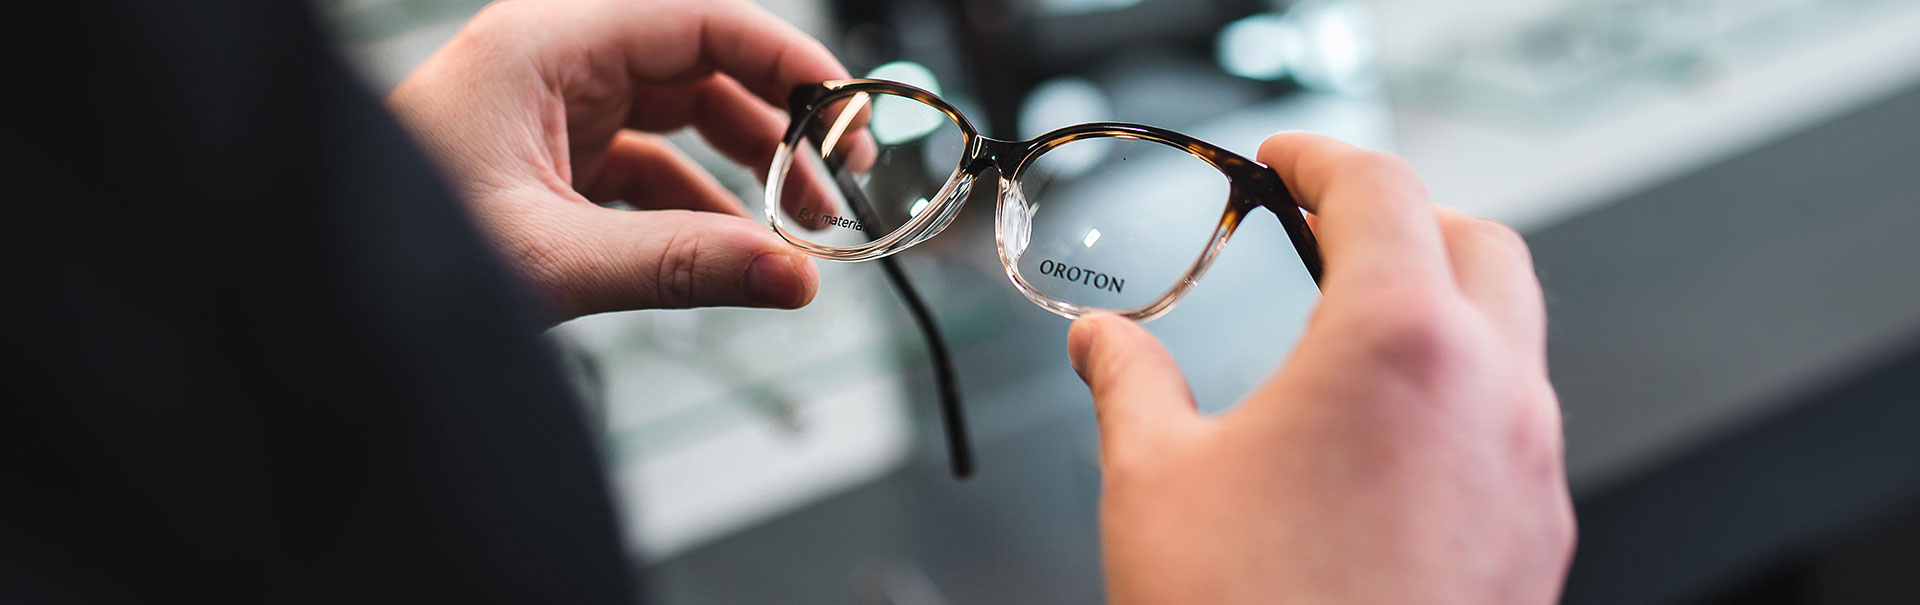 Close up of hands holding a pair of Oroton glasses